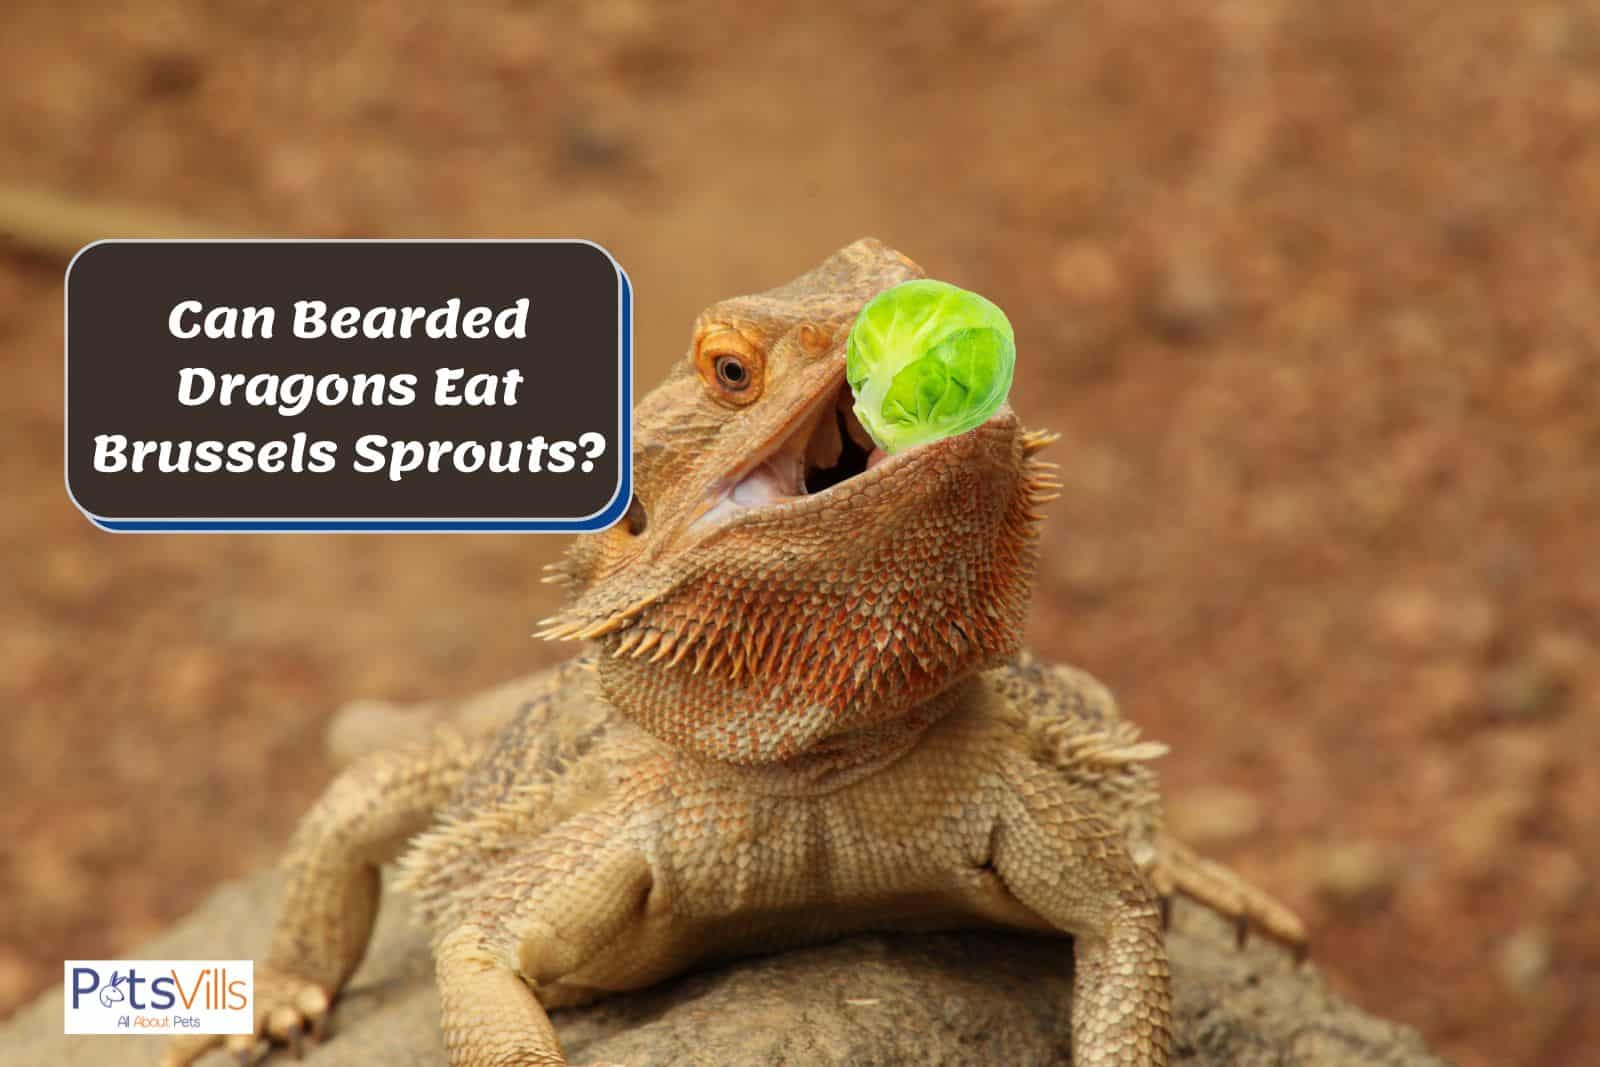 bearded dragon is eating brussels sprouts but I am concern about can bearded dragon eat brussels sprouts